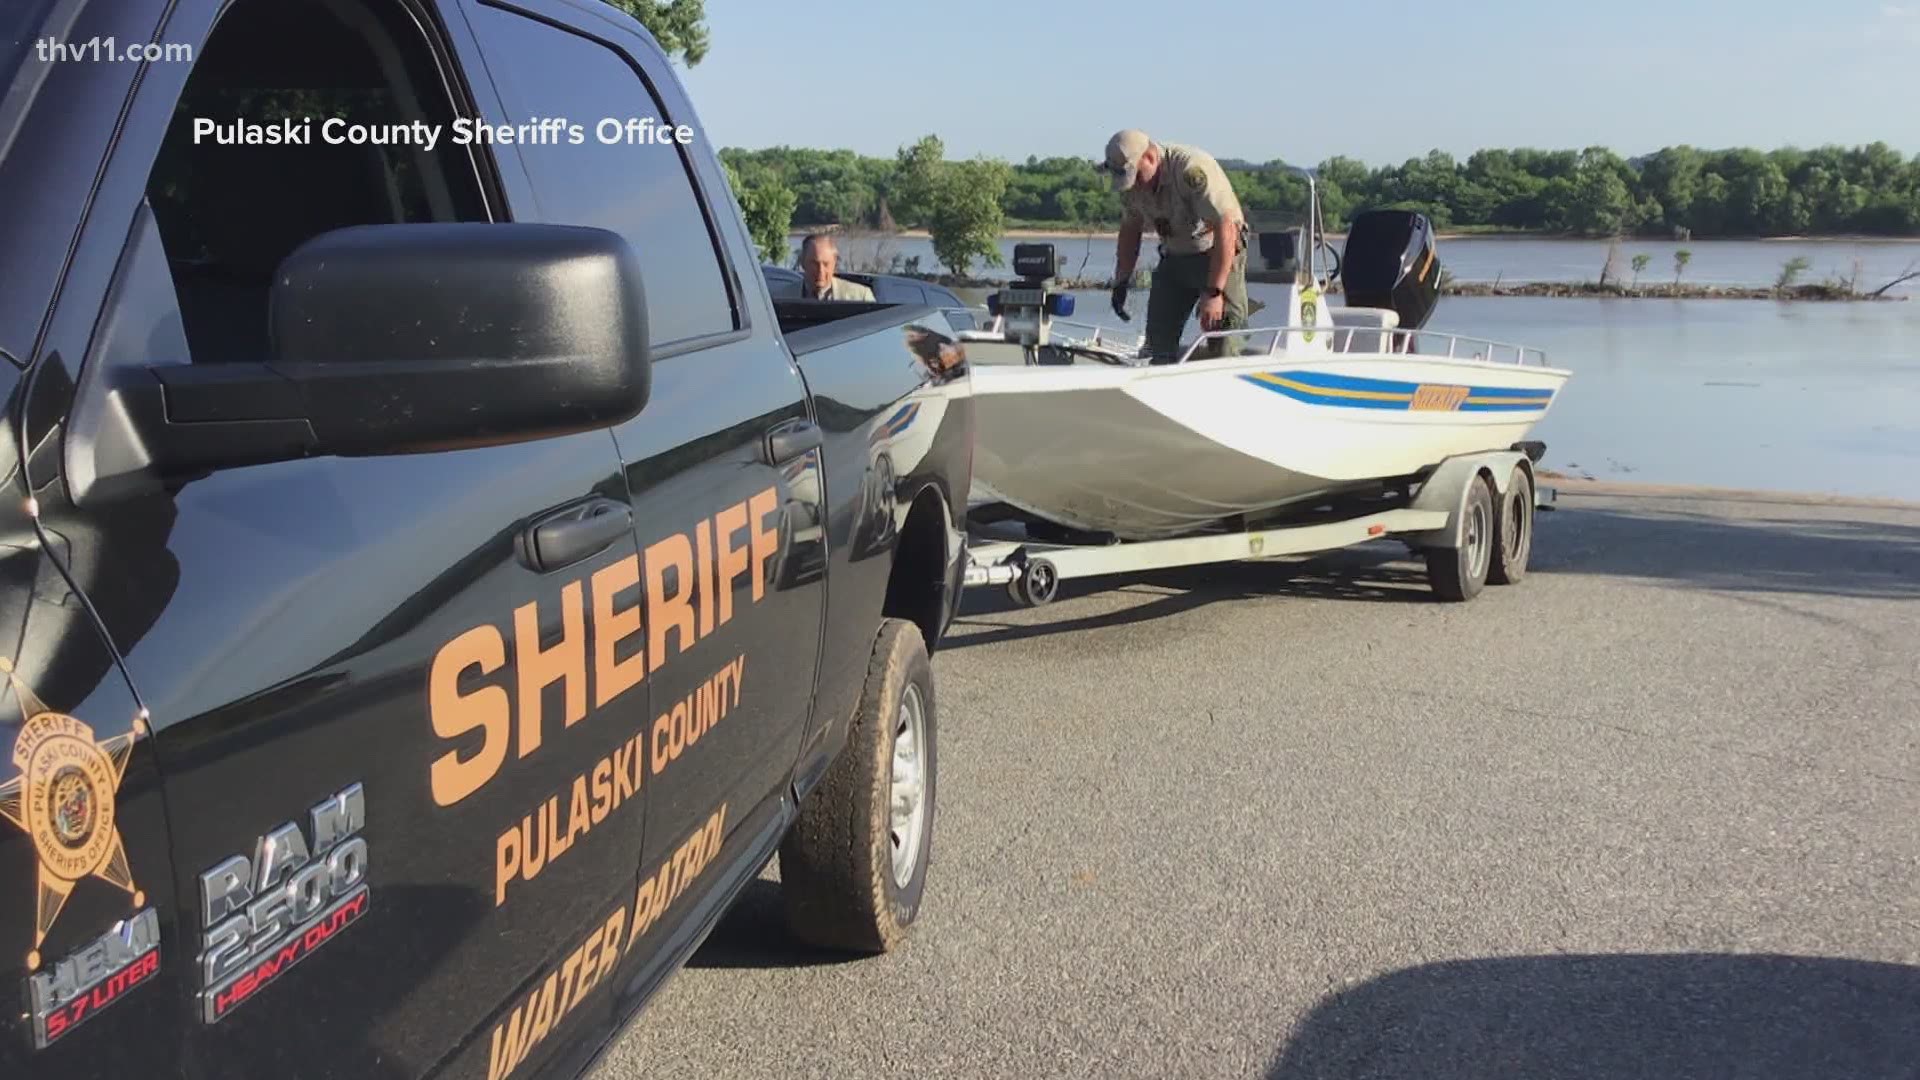 The body was found by a local fisherman near Murray Park in Little Rock. The body is at the State Medical Examiner for identification and cause of death.